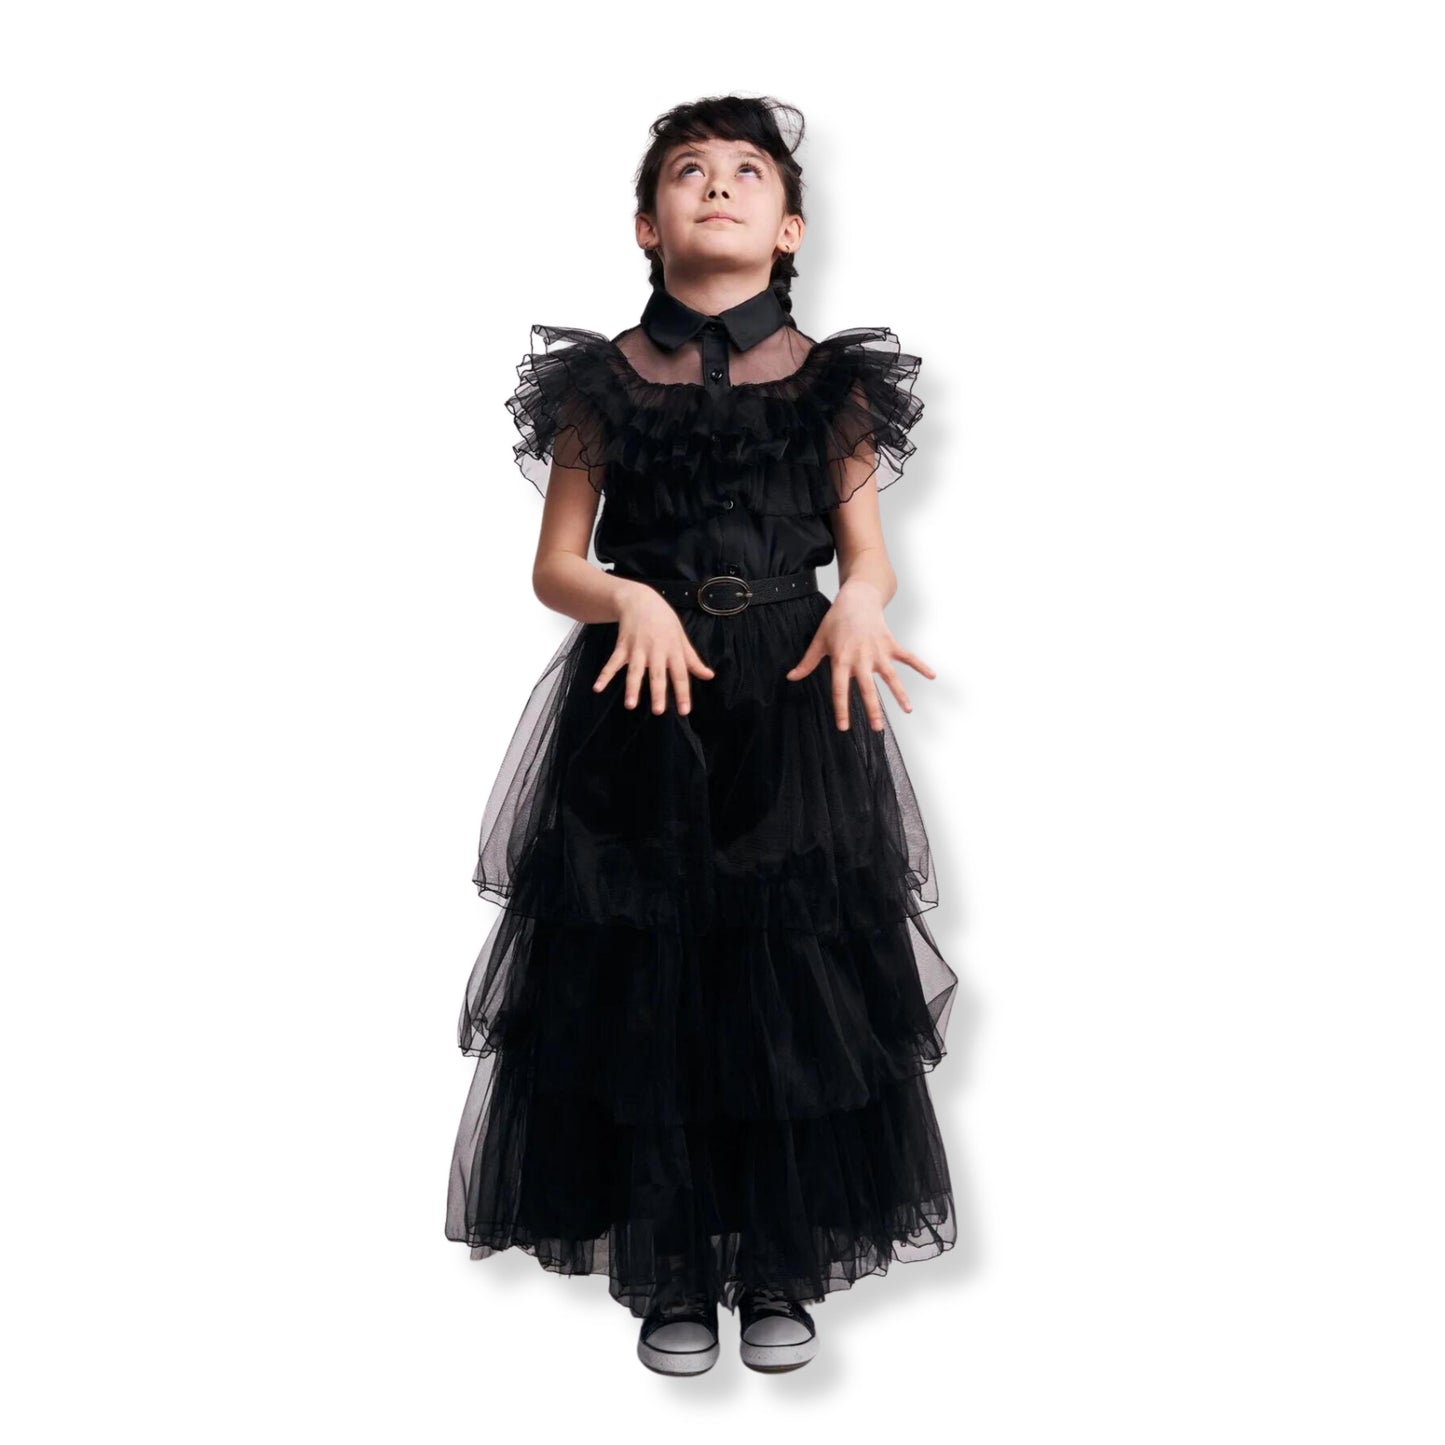 KidsKiddy™ - Exclusive Wednesday Ball Gown for Year-End Ball & Halloween Party